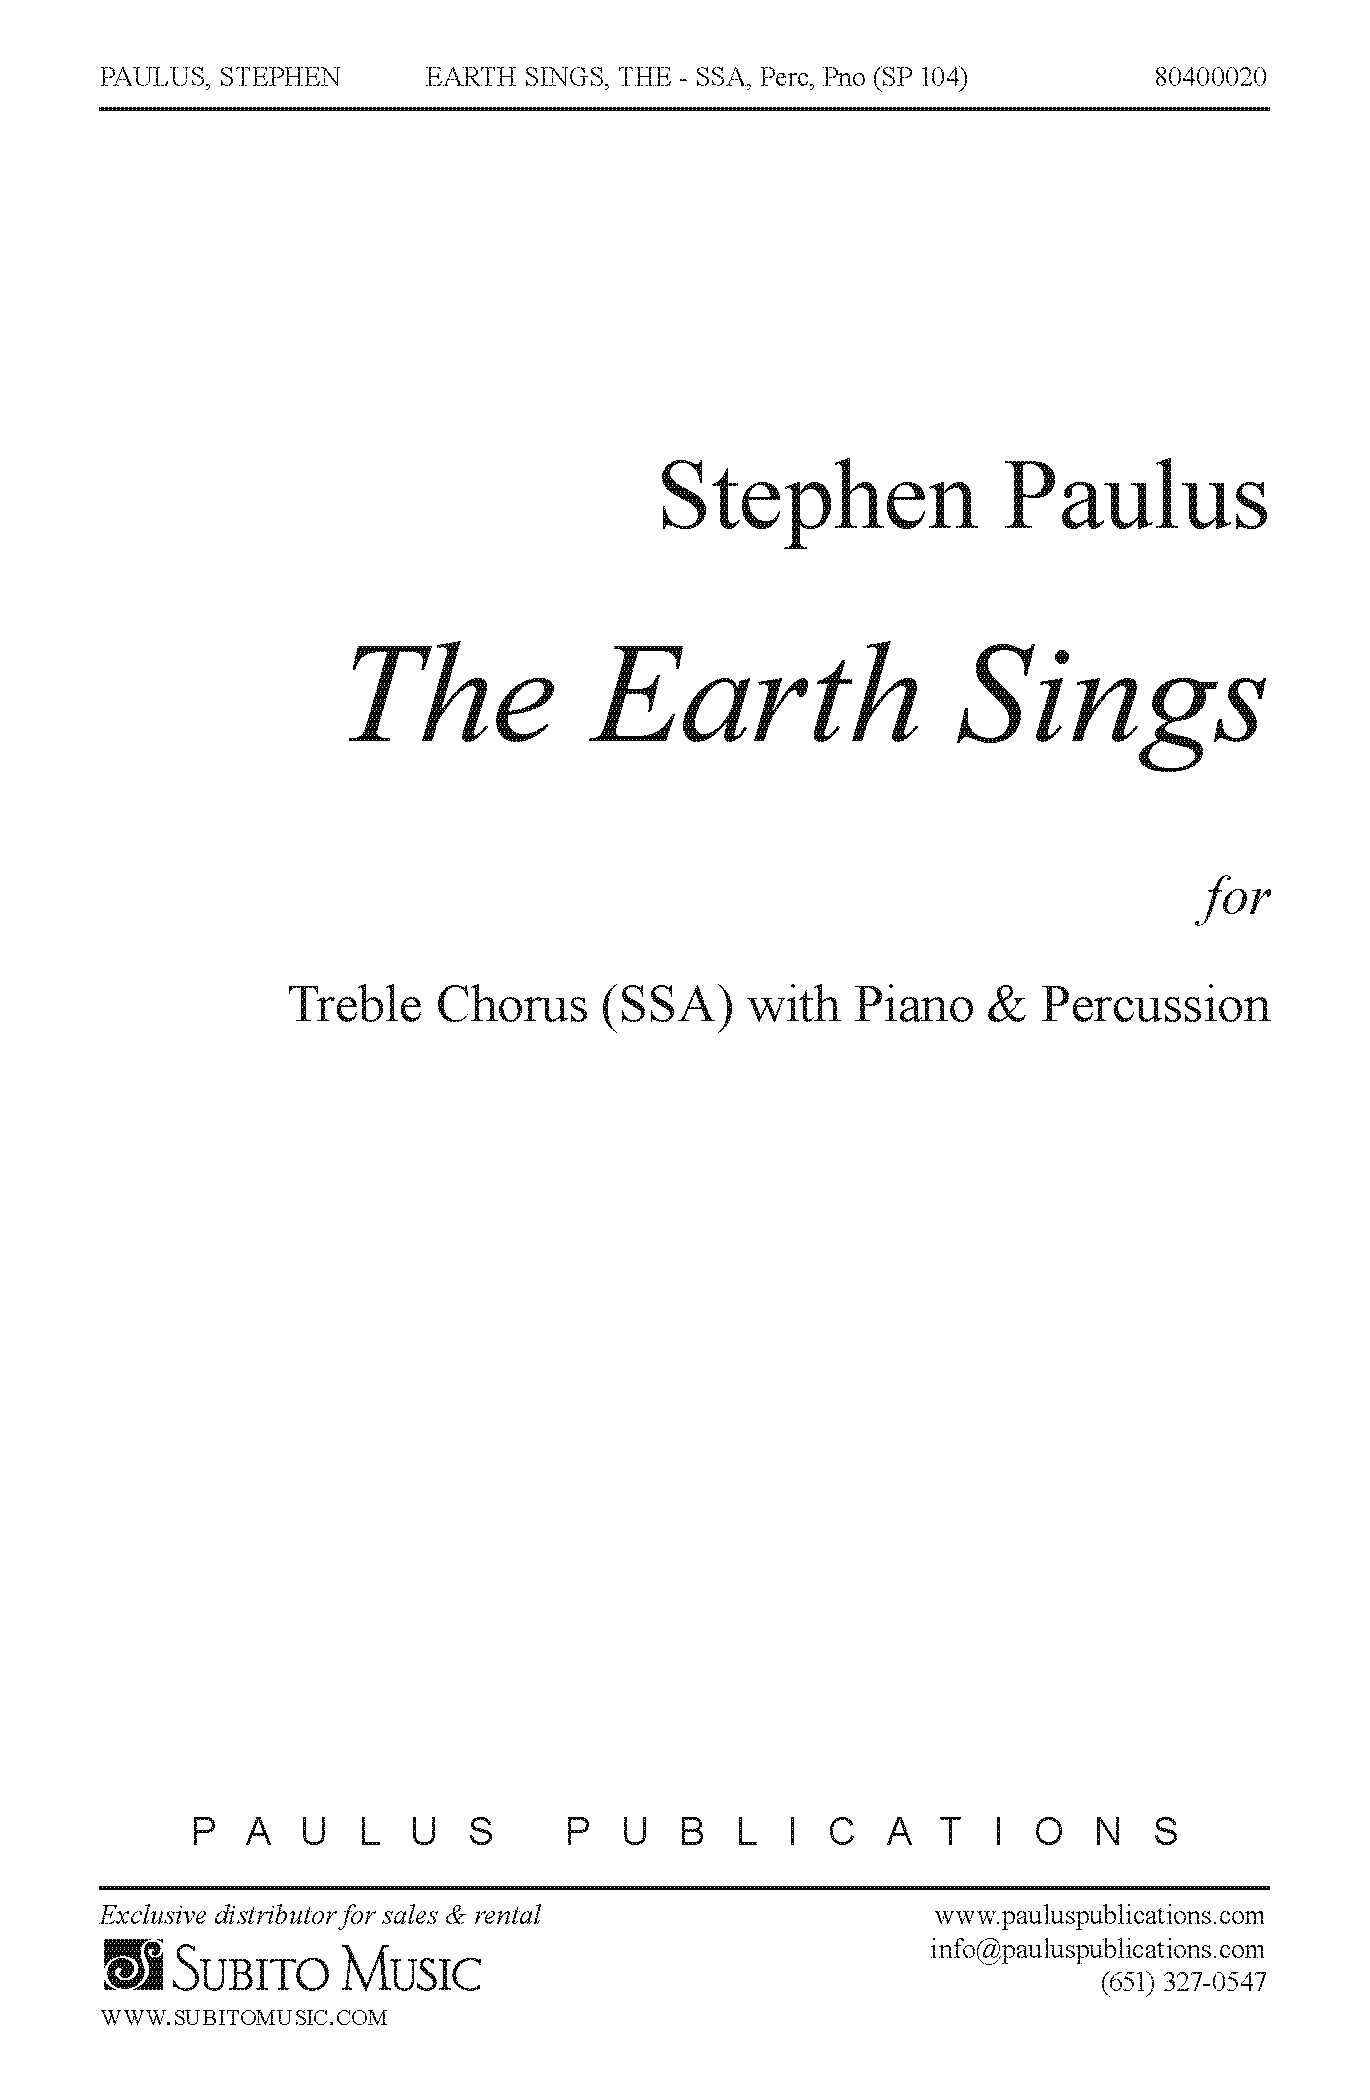 The Earth Sings - Percussion Part for SSAA Chorus, Piano & Hand Percussion